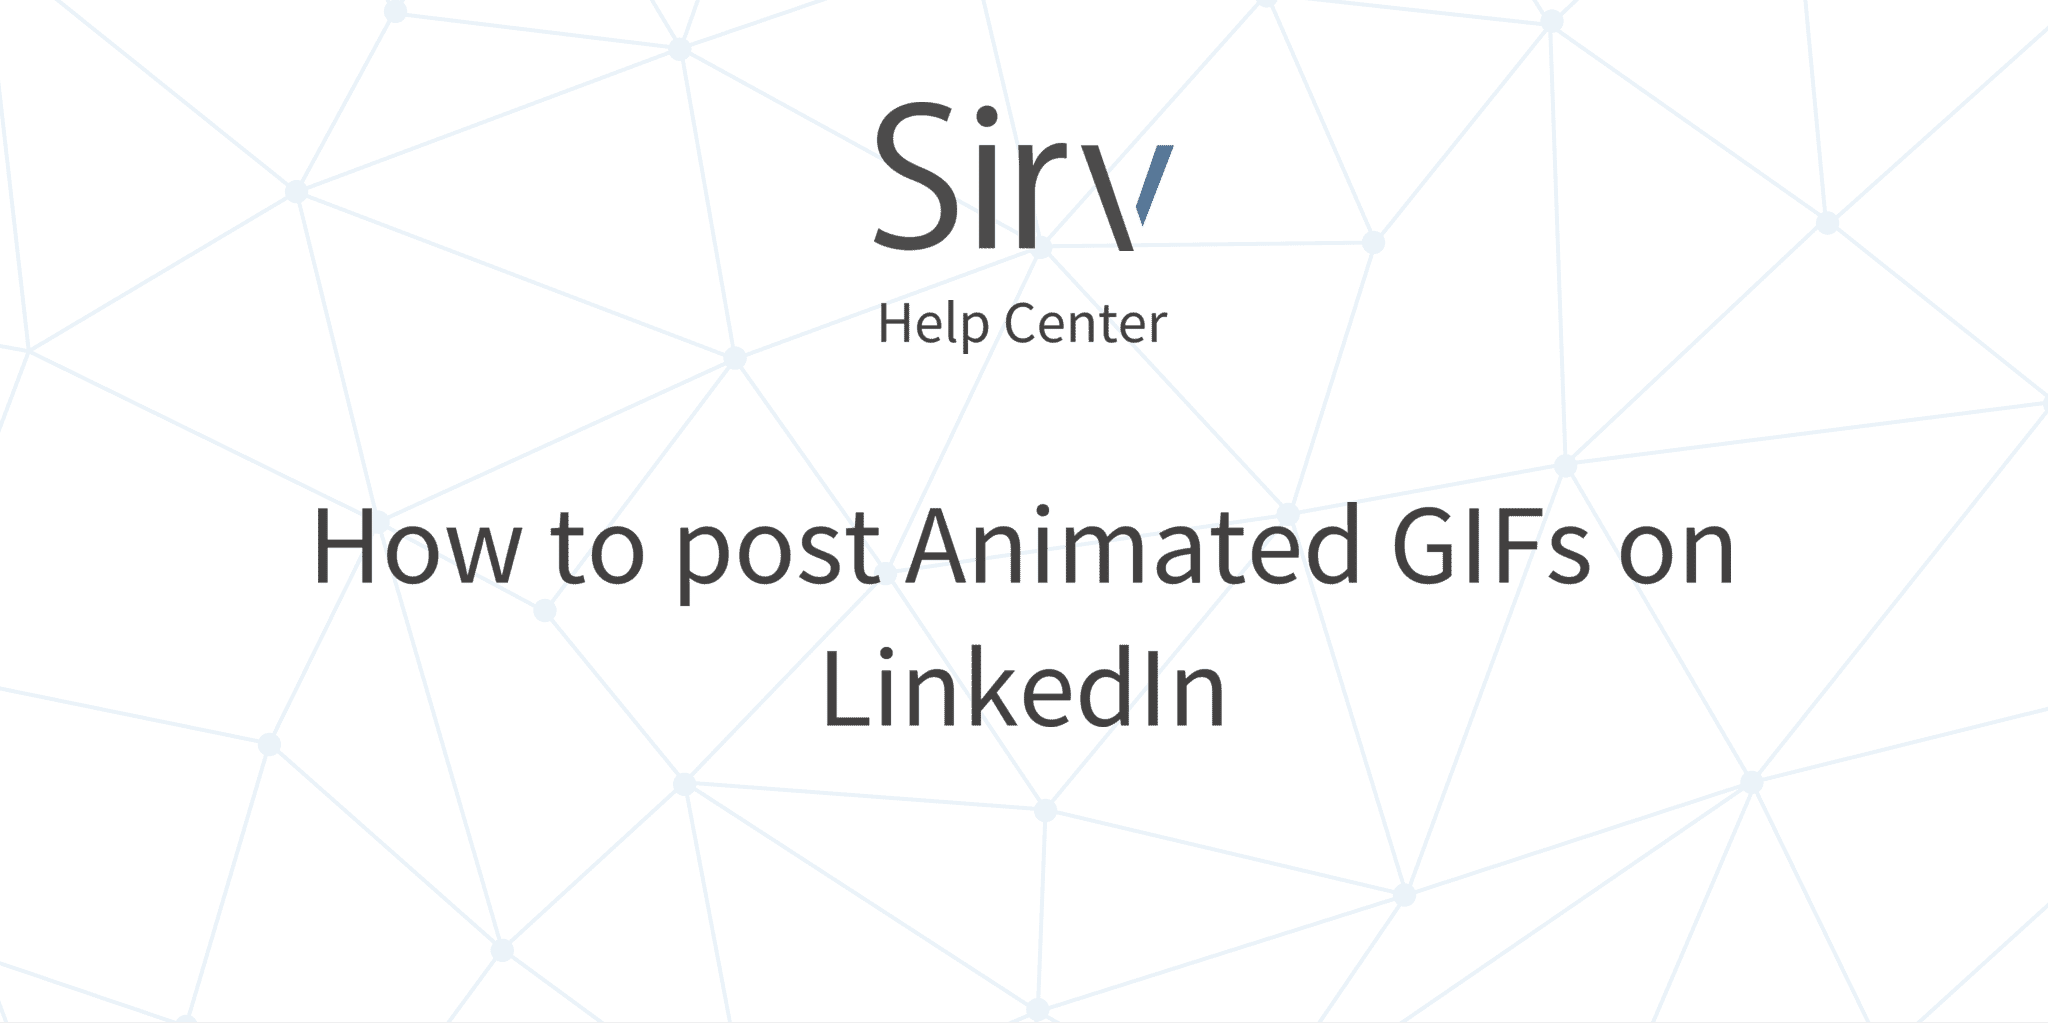 How to post Animated GIFs on LinkedIn - Sirv Help Center